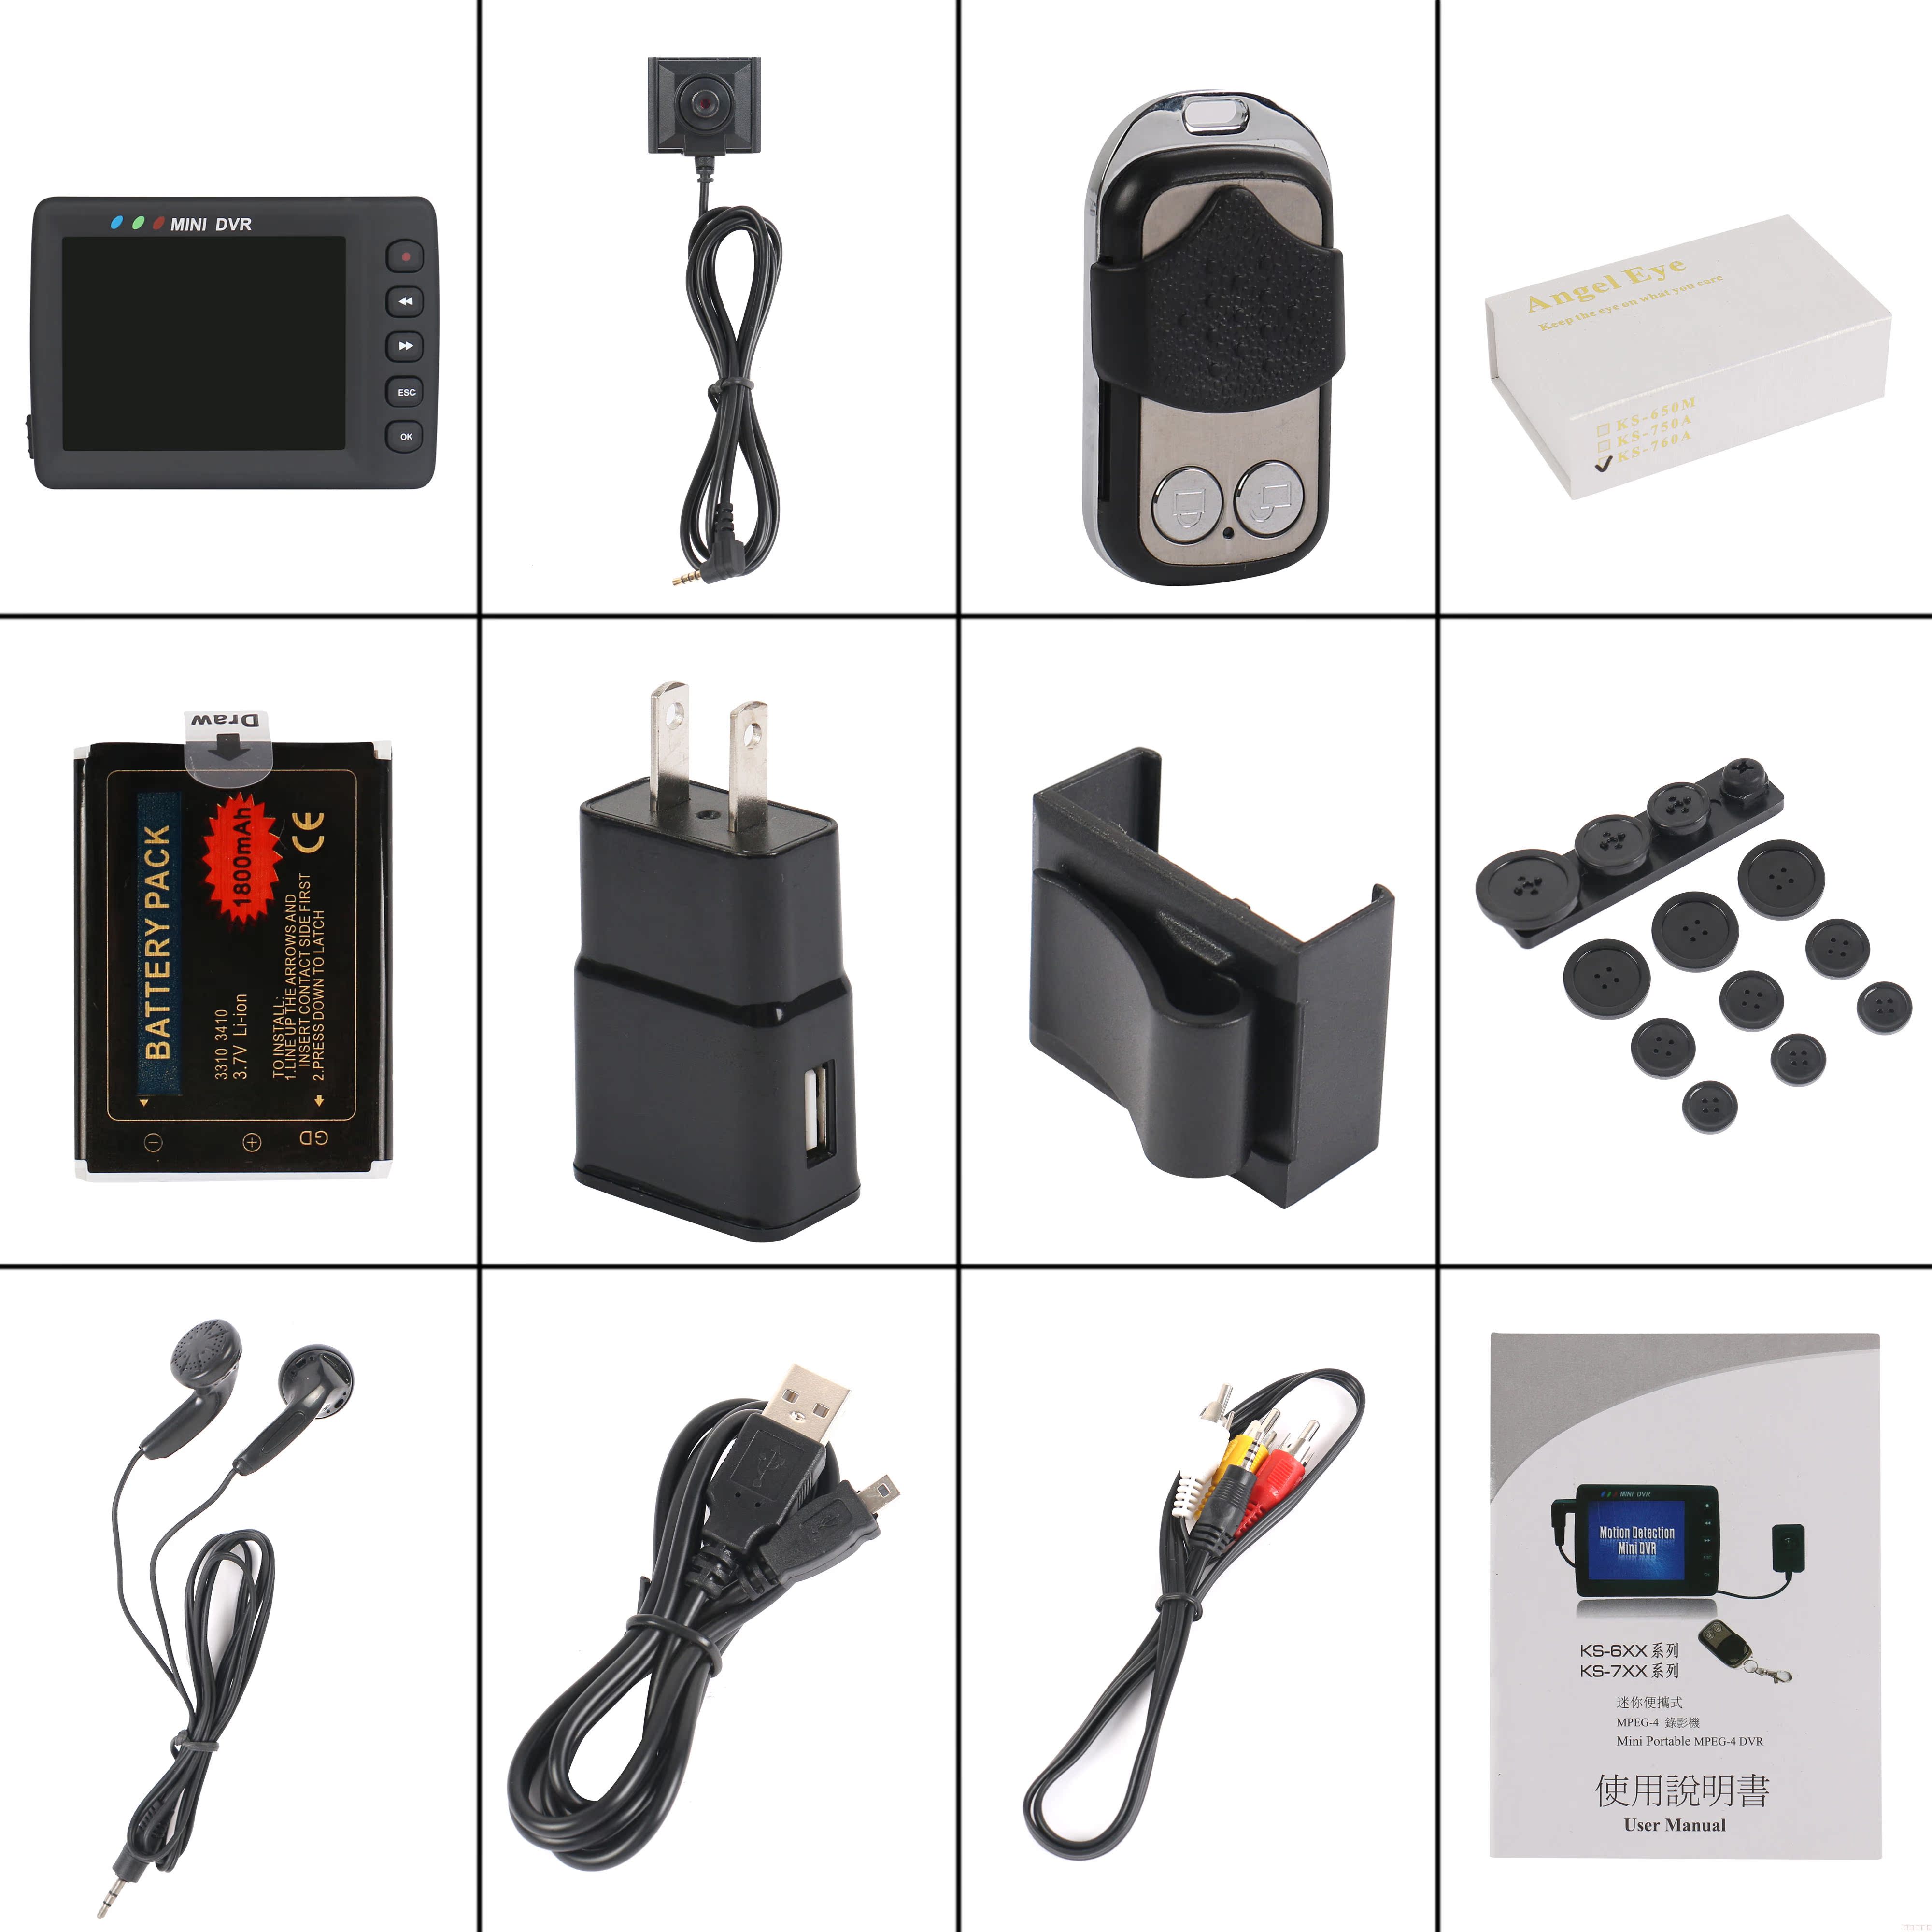 5 58 Special Ks 750a Angel Eye Camera 1800mah Lithium Battery Charger Monitoring Accessories From Best Taobao Agent Taobao International International Ecommerce Newbecca Com